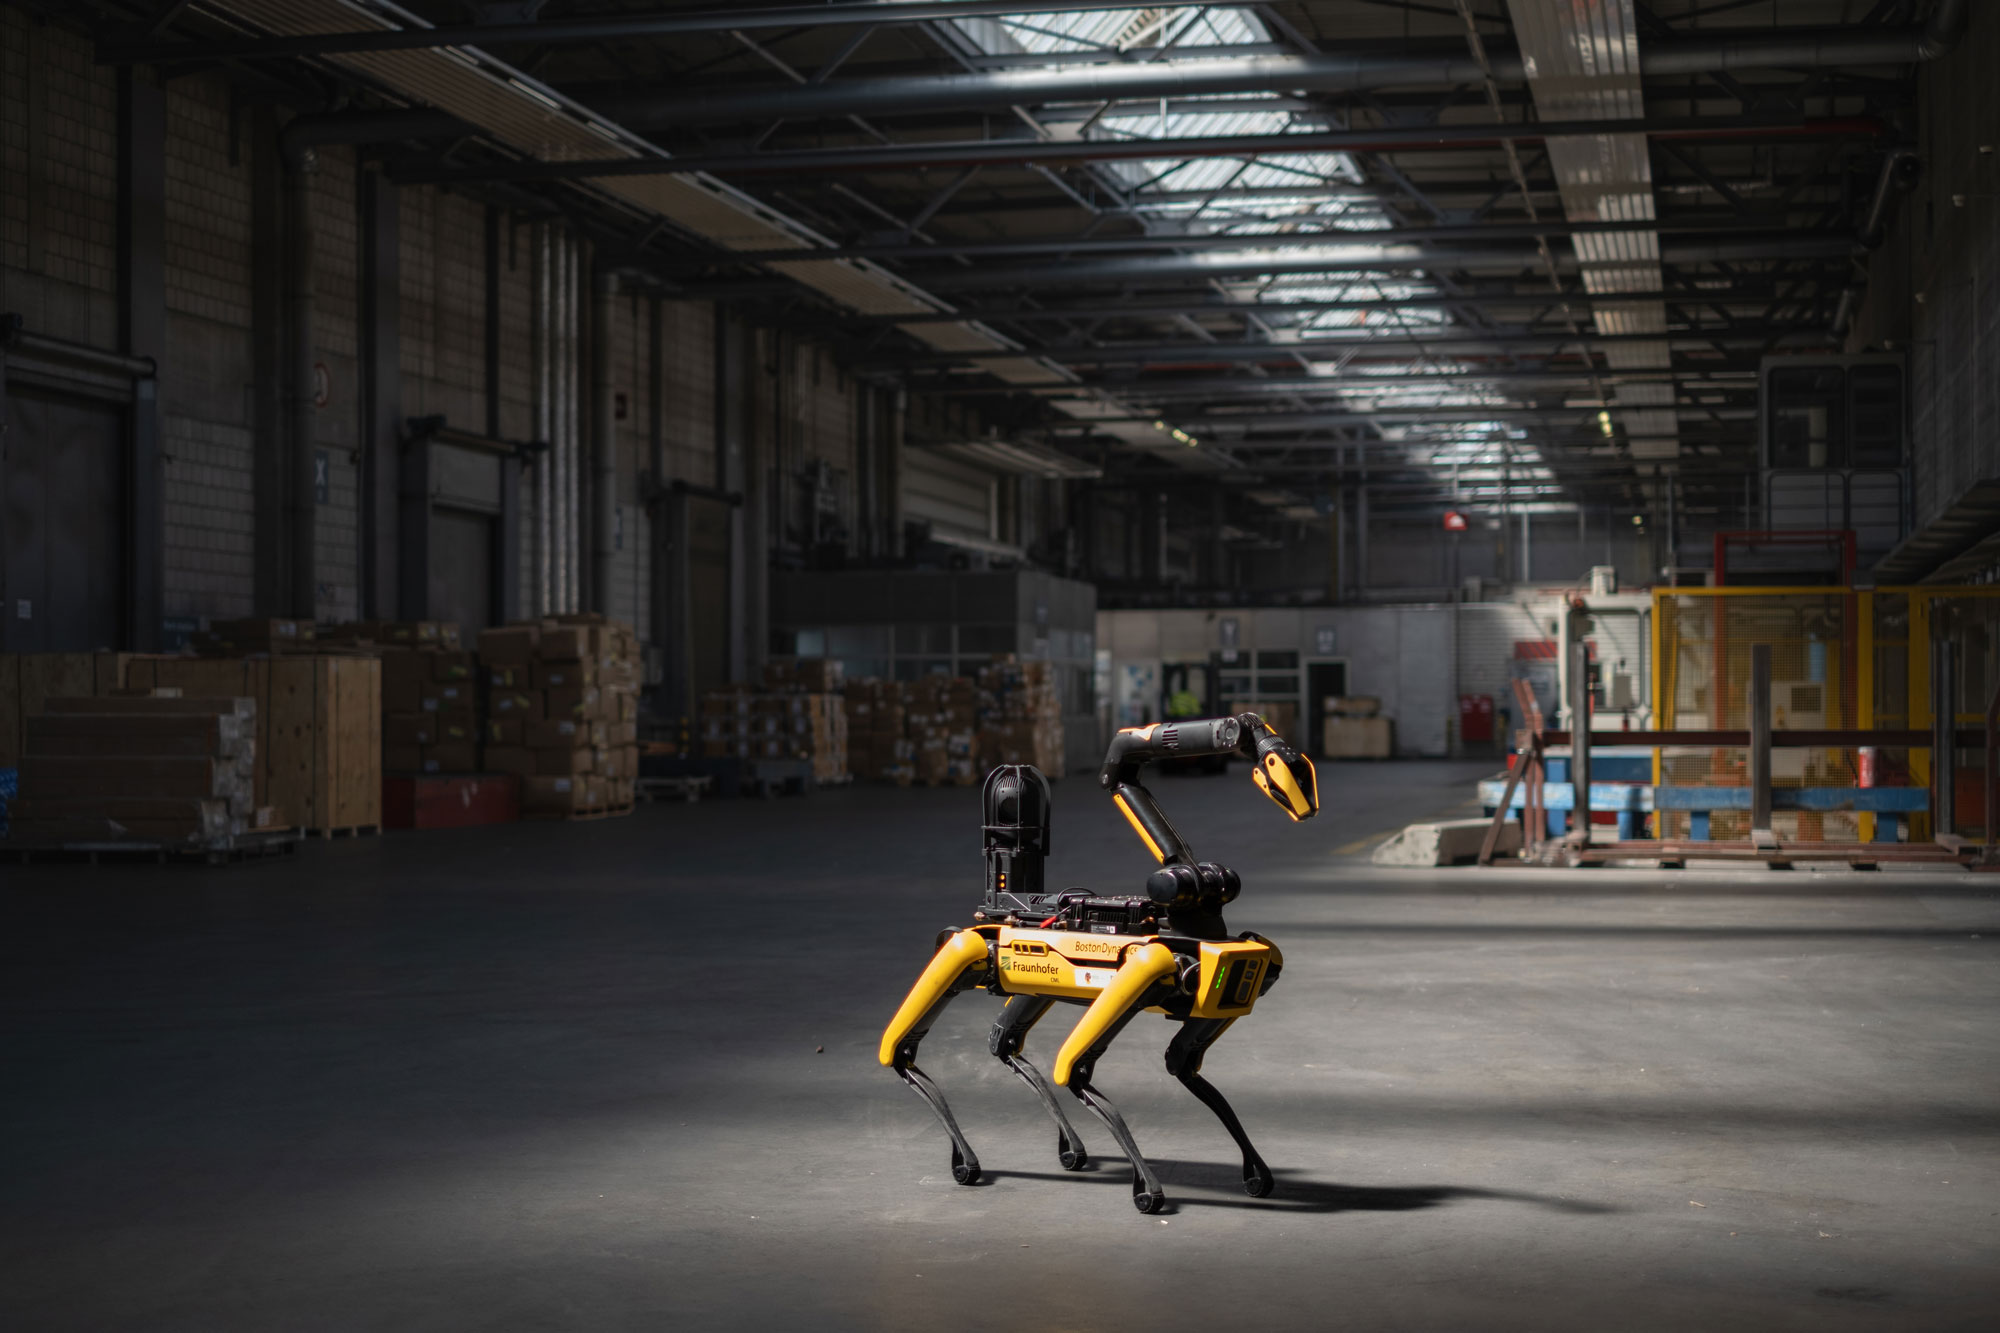 Robot dog Spot from Boston Dynamics patrols autonomously in the warehouse during air freight handling at Munich Airport during the presentation of the DTAC research project.